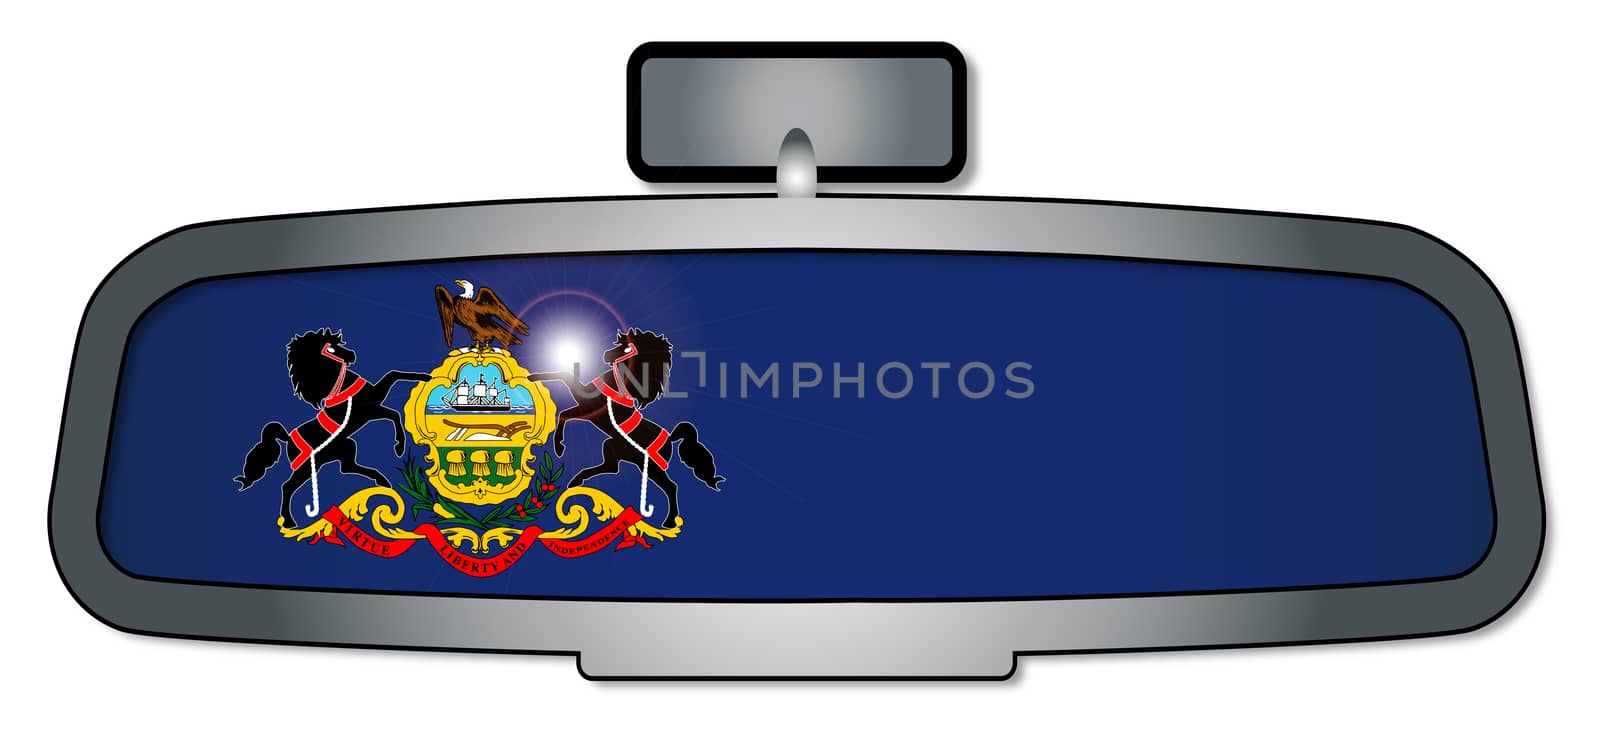 A vehicle rear view mirror with the flag of the state of Pennsylvania